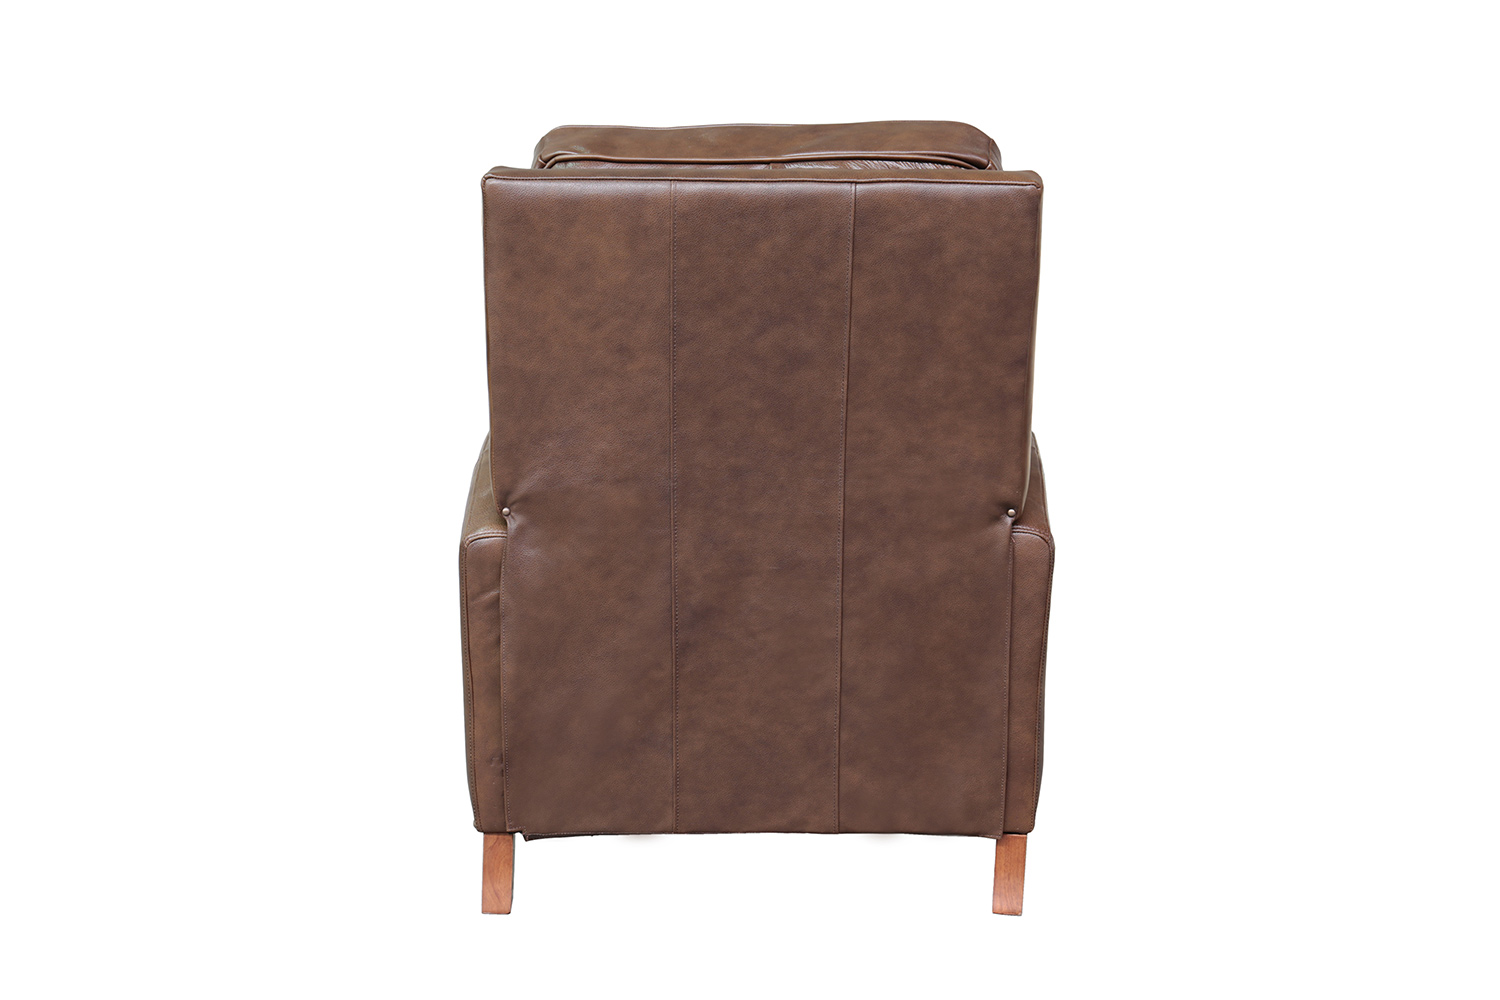 Barcalounger Melrose Recliner Chair - Wenlock Double Chocolate/All Leather